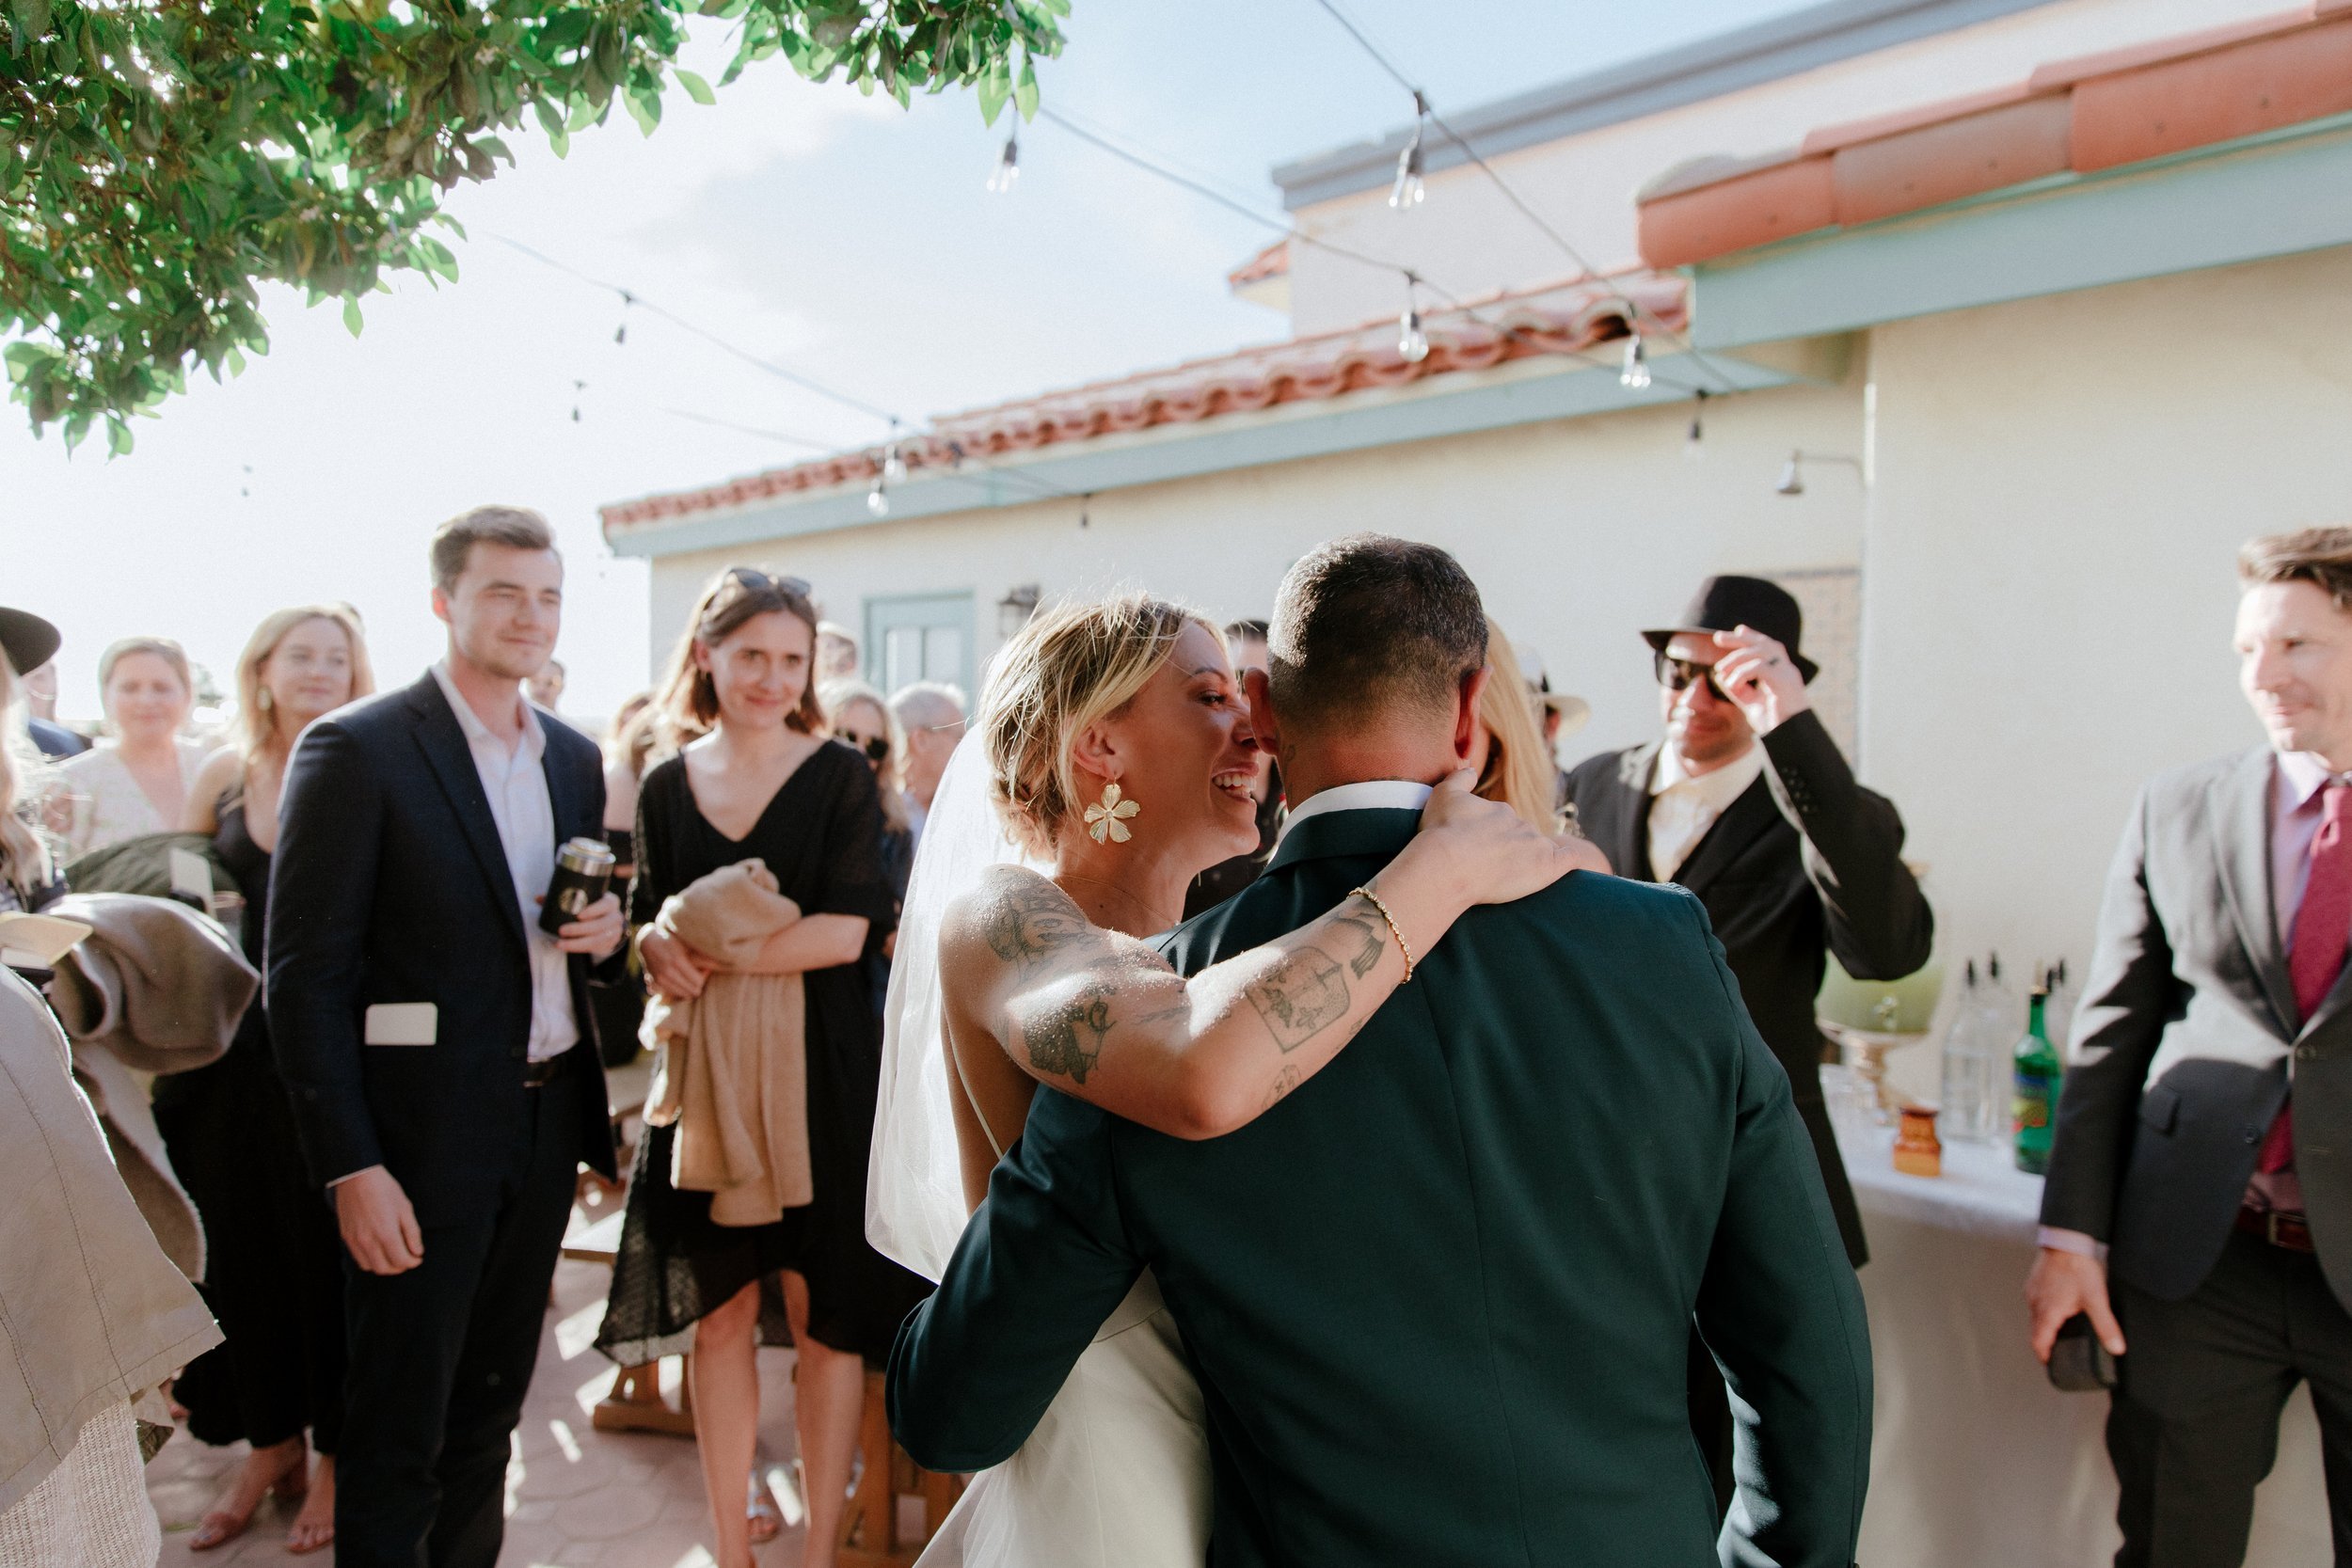 www.santabarbarawedding.com | Chris J. Evans | Paul Smith Suits | Couple Embracing Surrounded by Guests After the Ceremony 